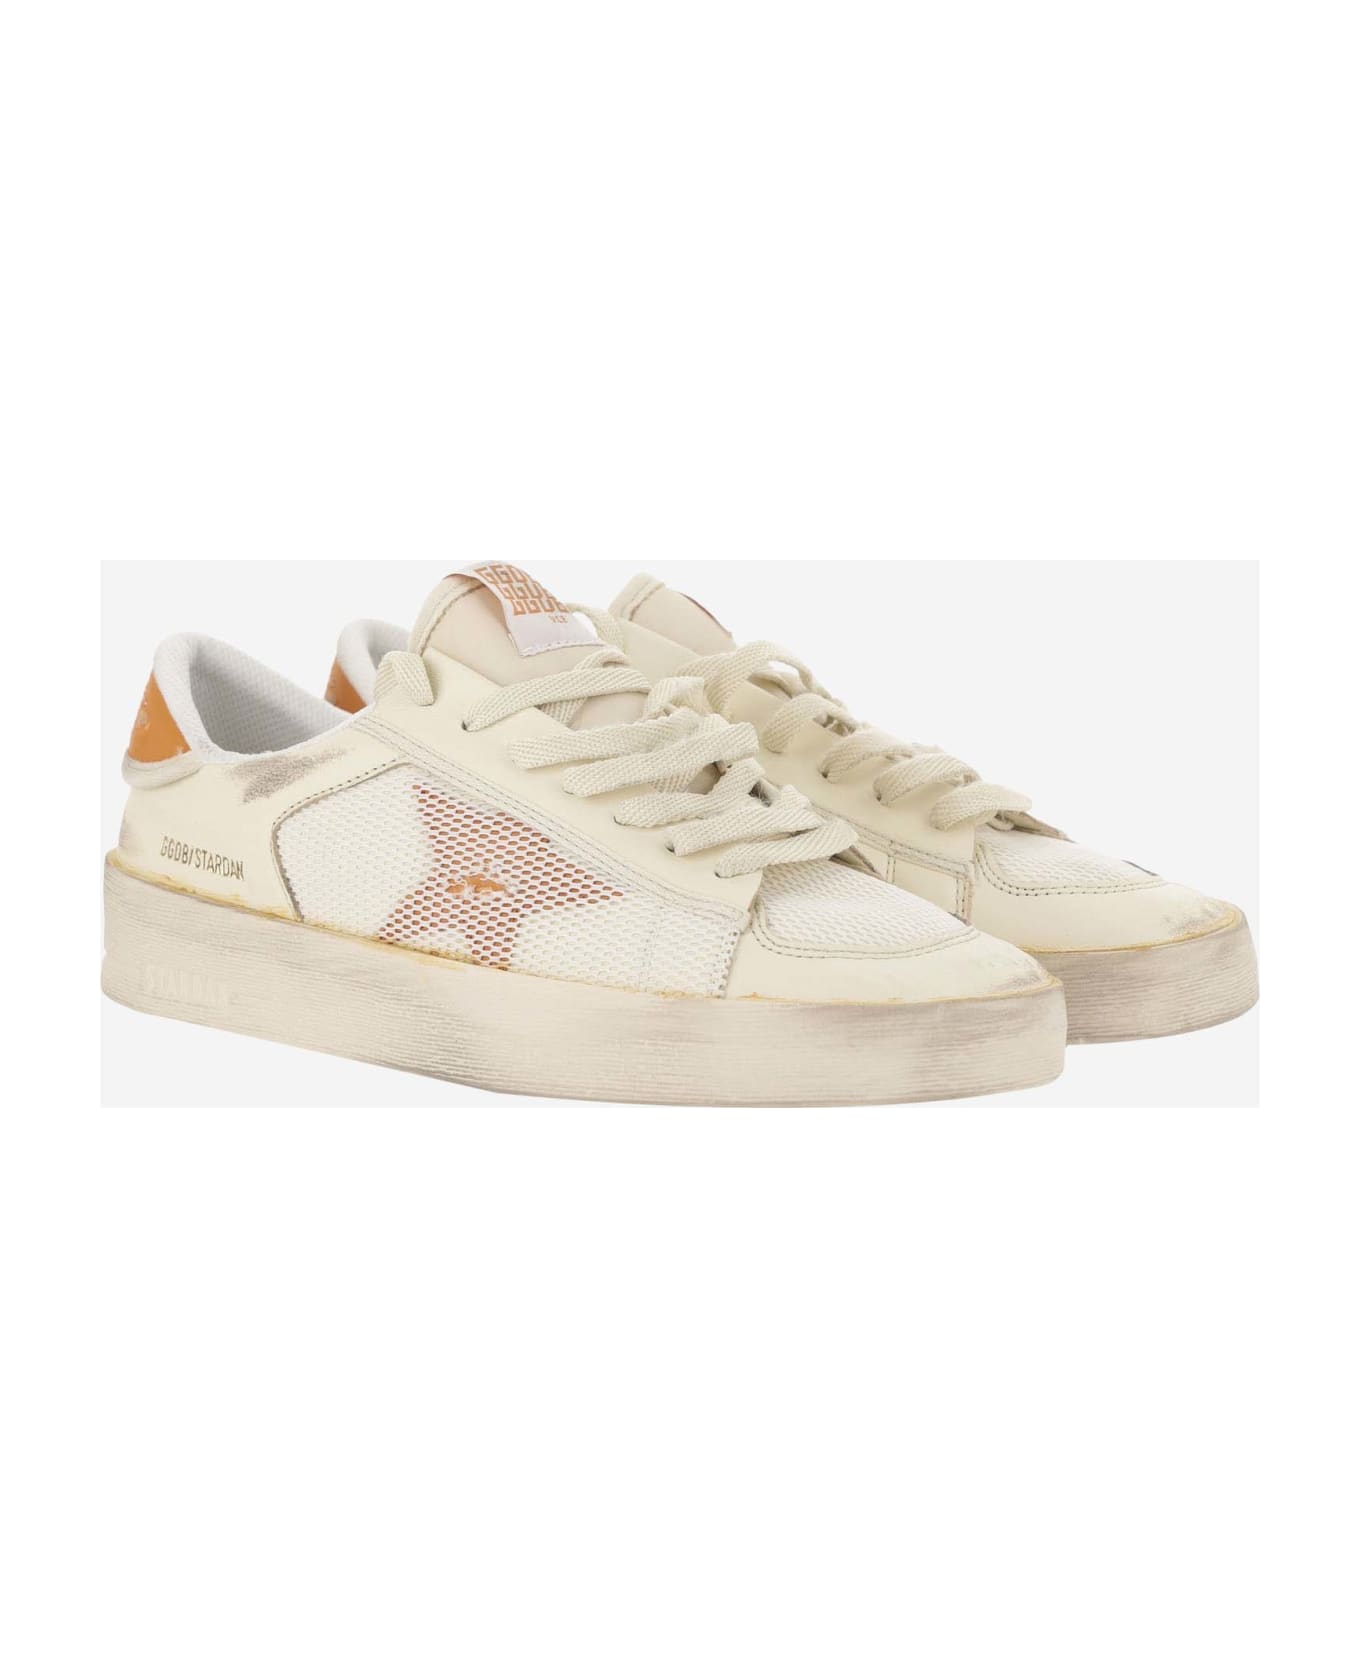 Golden Goose Stardan Sneakers With Distressed Effect - WHITE-ORANGE